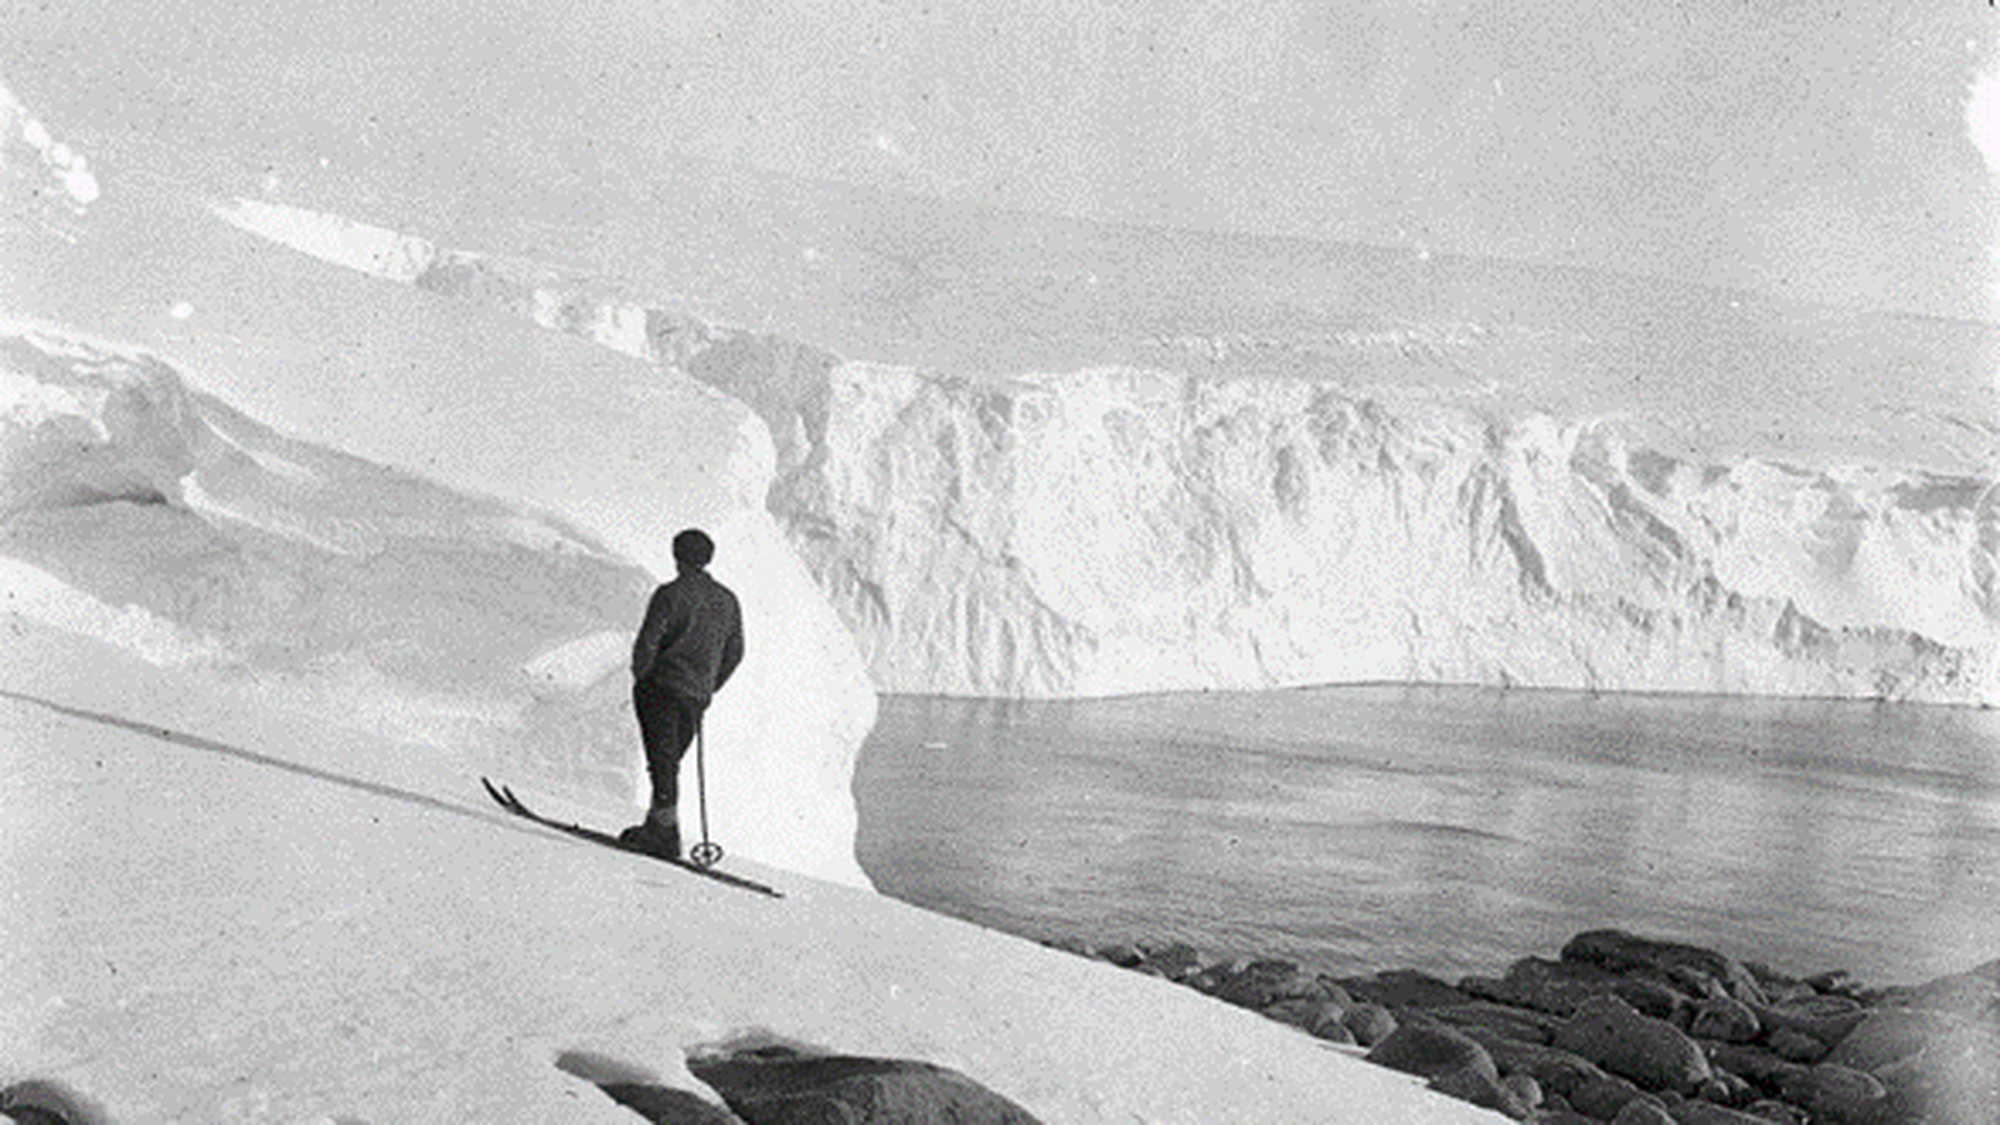 ‘The ice cliff at Land’s End. Xavier Mertz on skis’ © Mertz, Xavier (1913), from the collections of the State Library of New South Wales